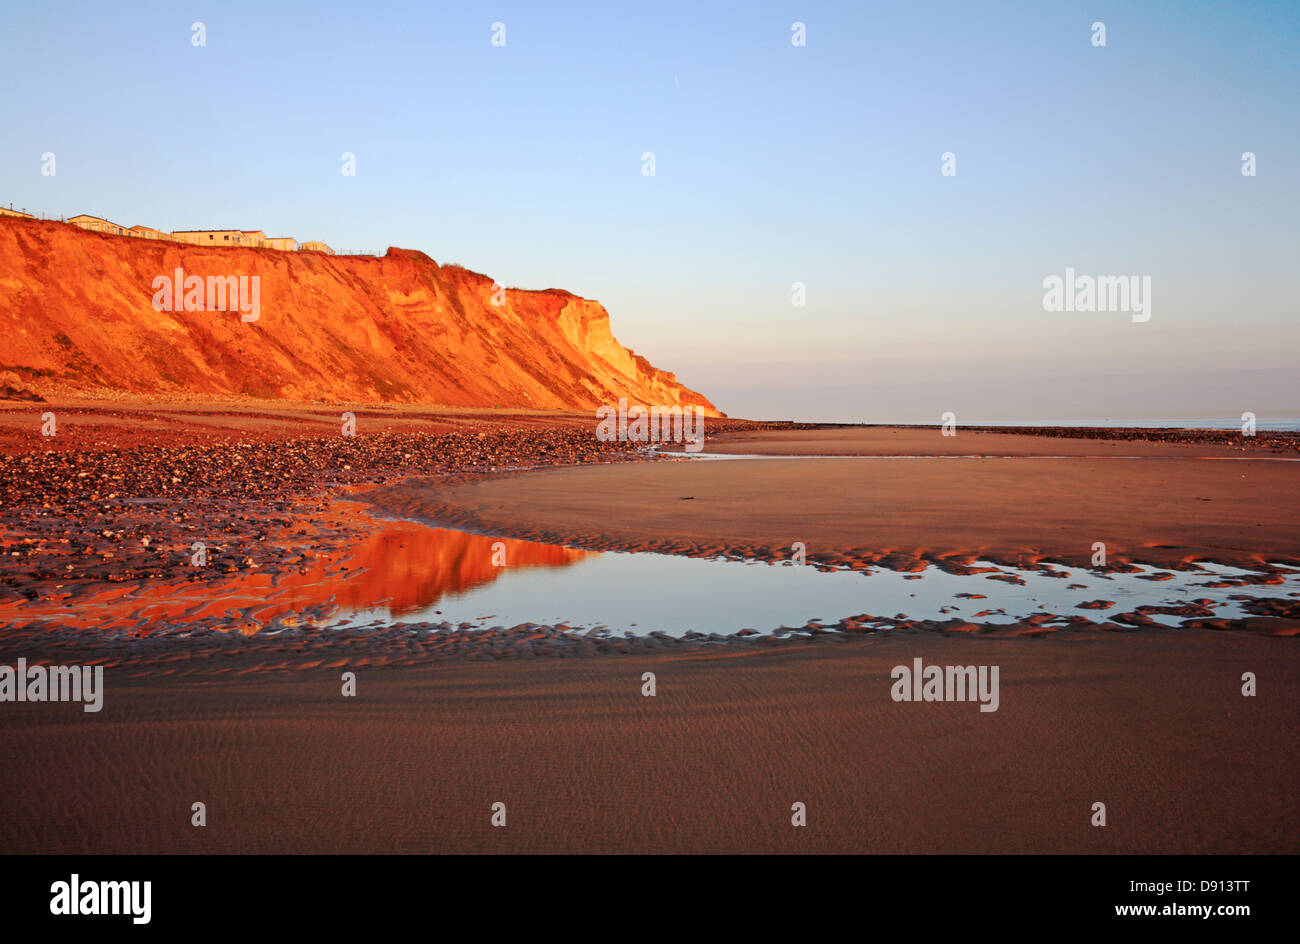 A view of the beach and cliffs with reflections in early morning sun at East Runton, Norfolk, England, United Kingdom. Stock Photo